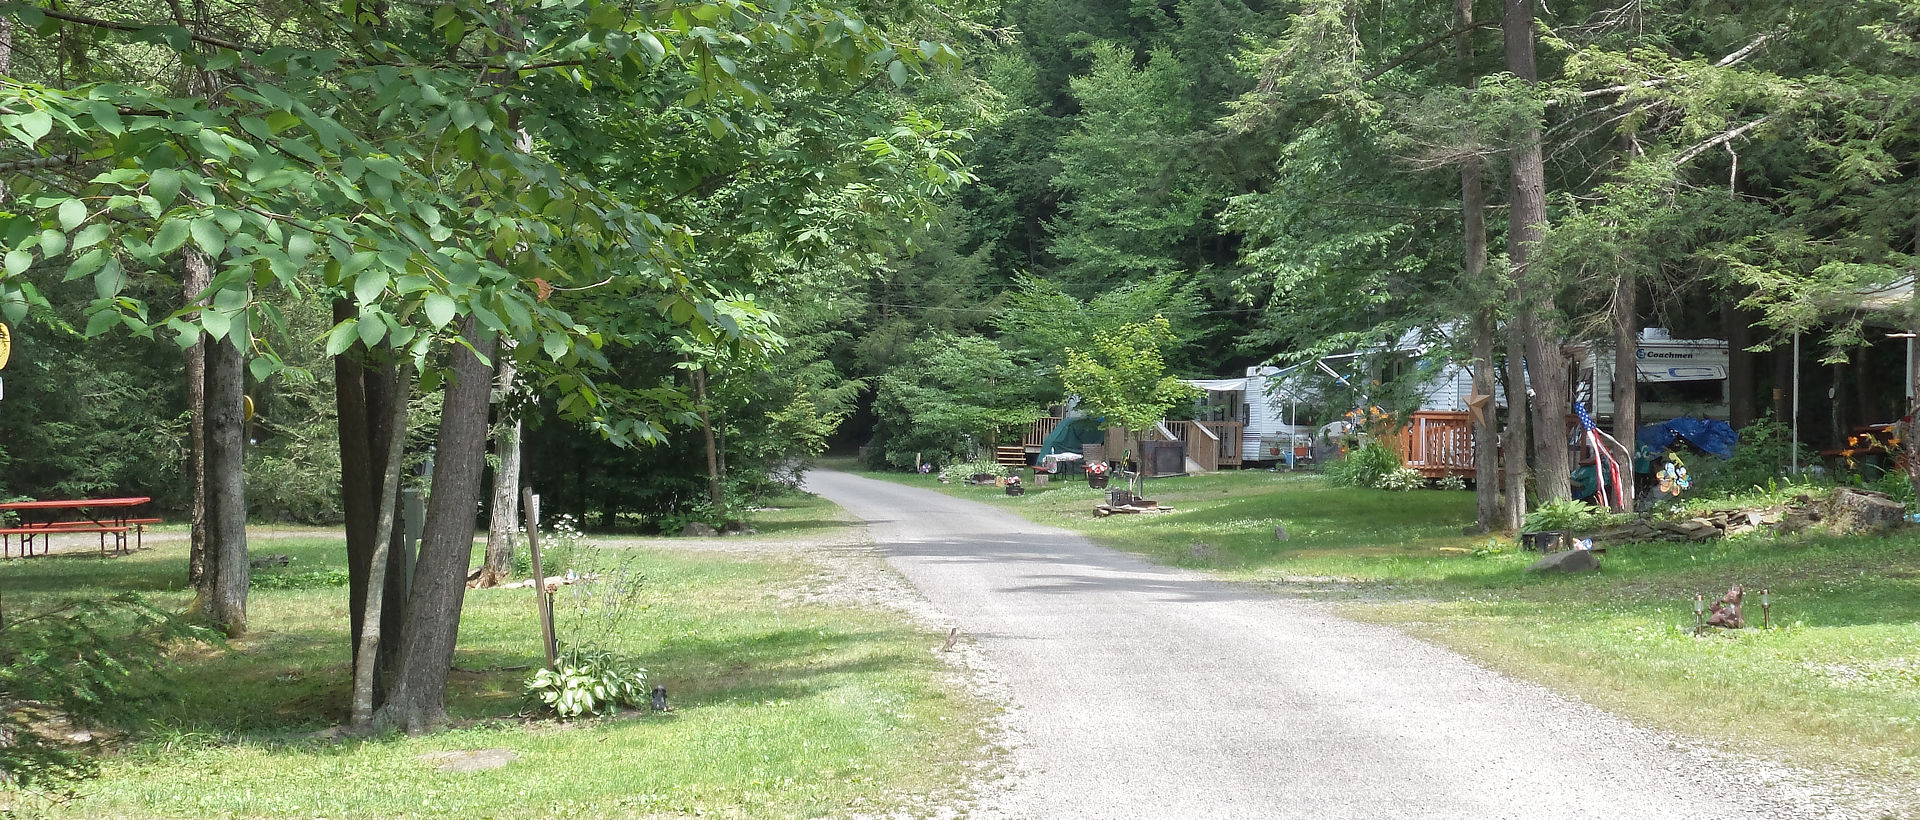 Looking down the lane at Lakeside Campground